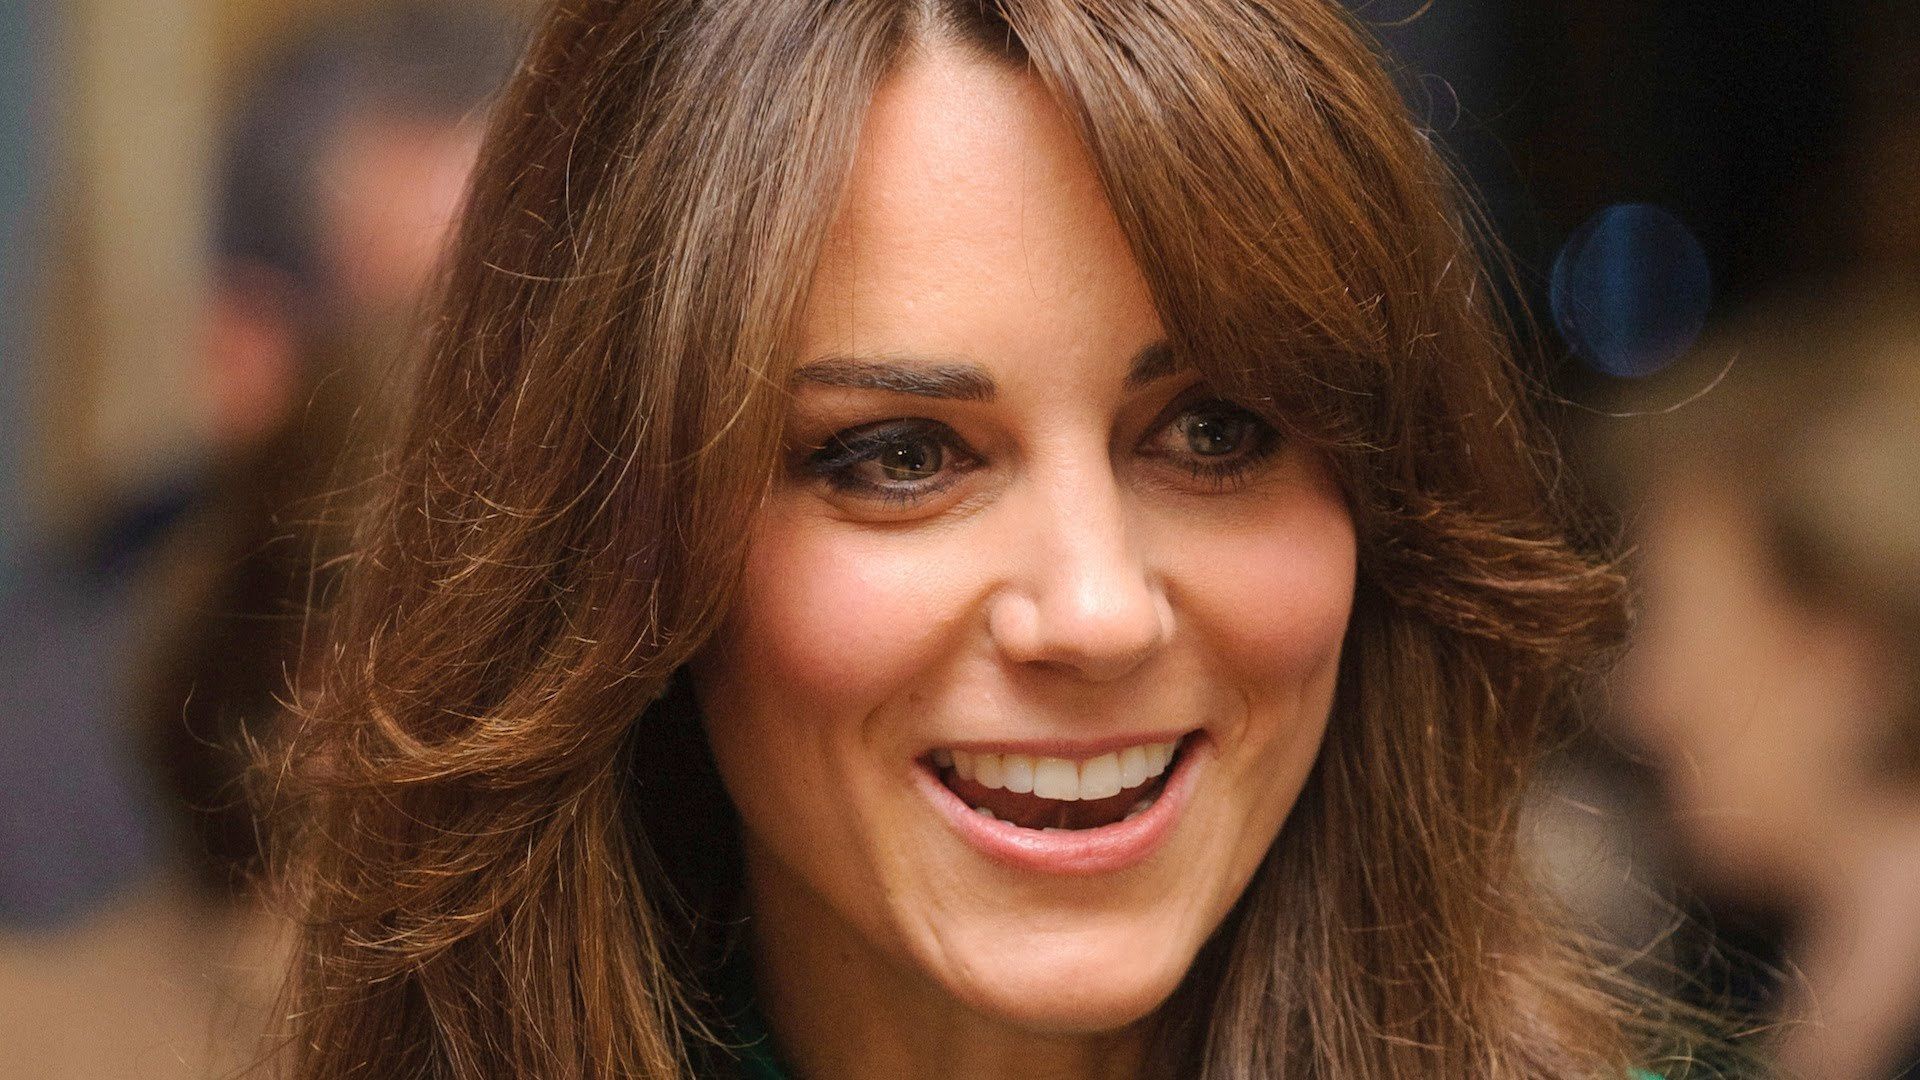 Kate Middleton Wallpaper Image Photo Picture Background